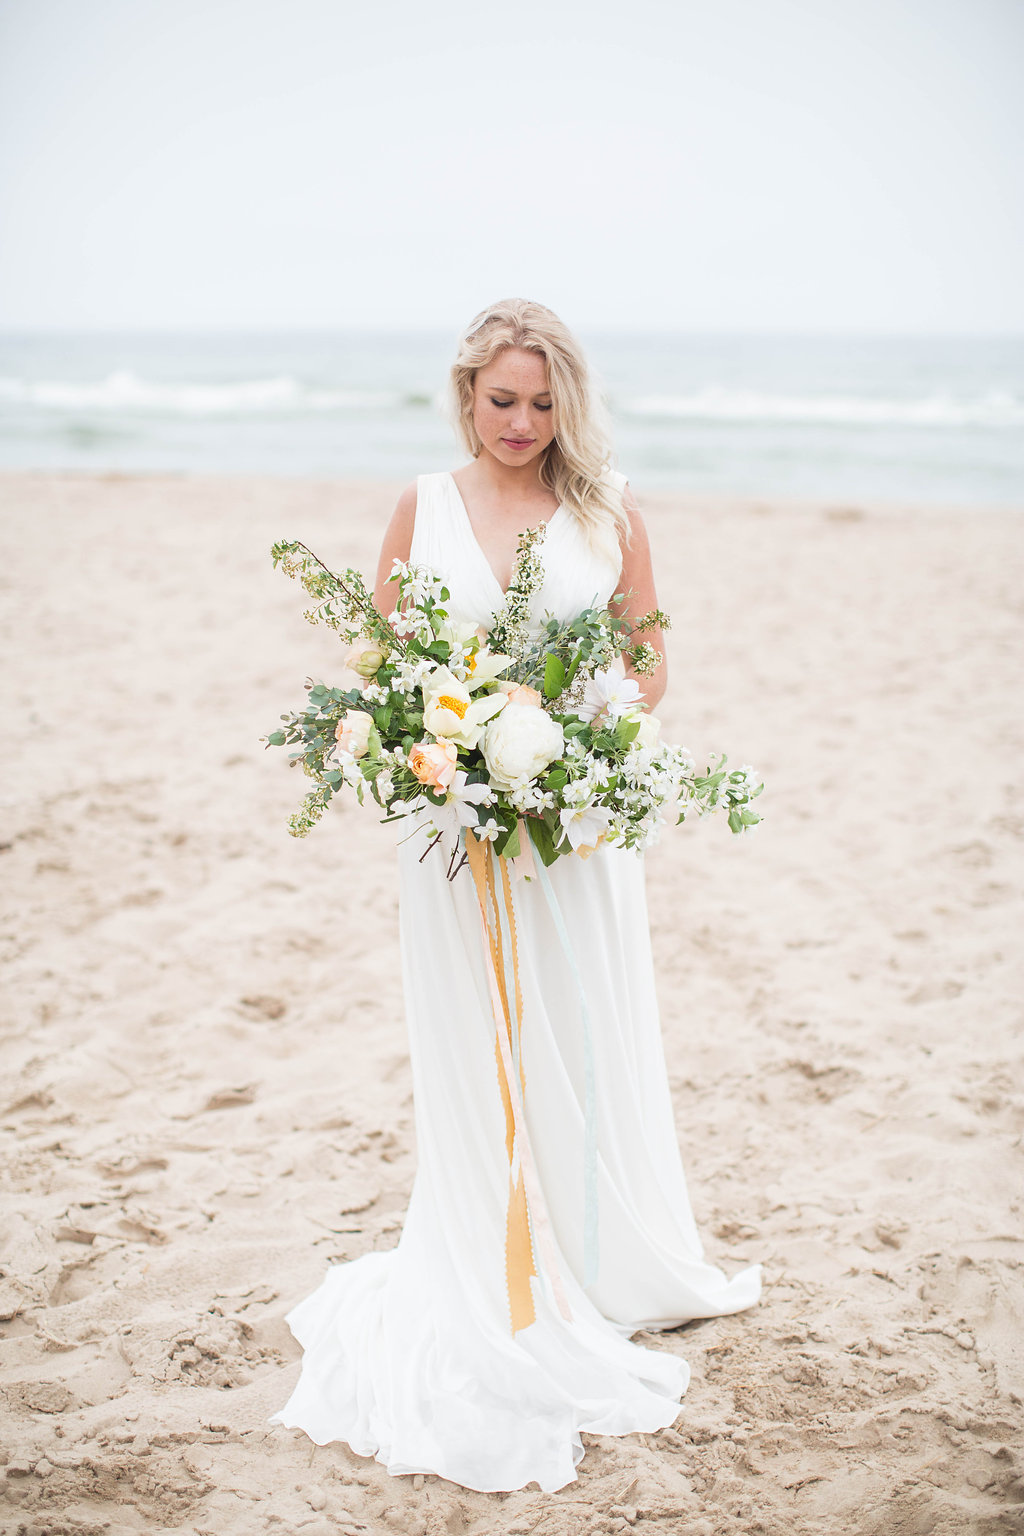 Spring Beach Bouquet | The Day's Design | Ashley Slater Photography